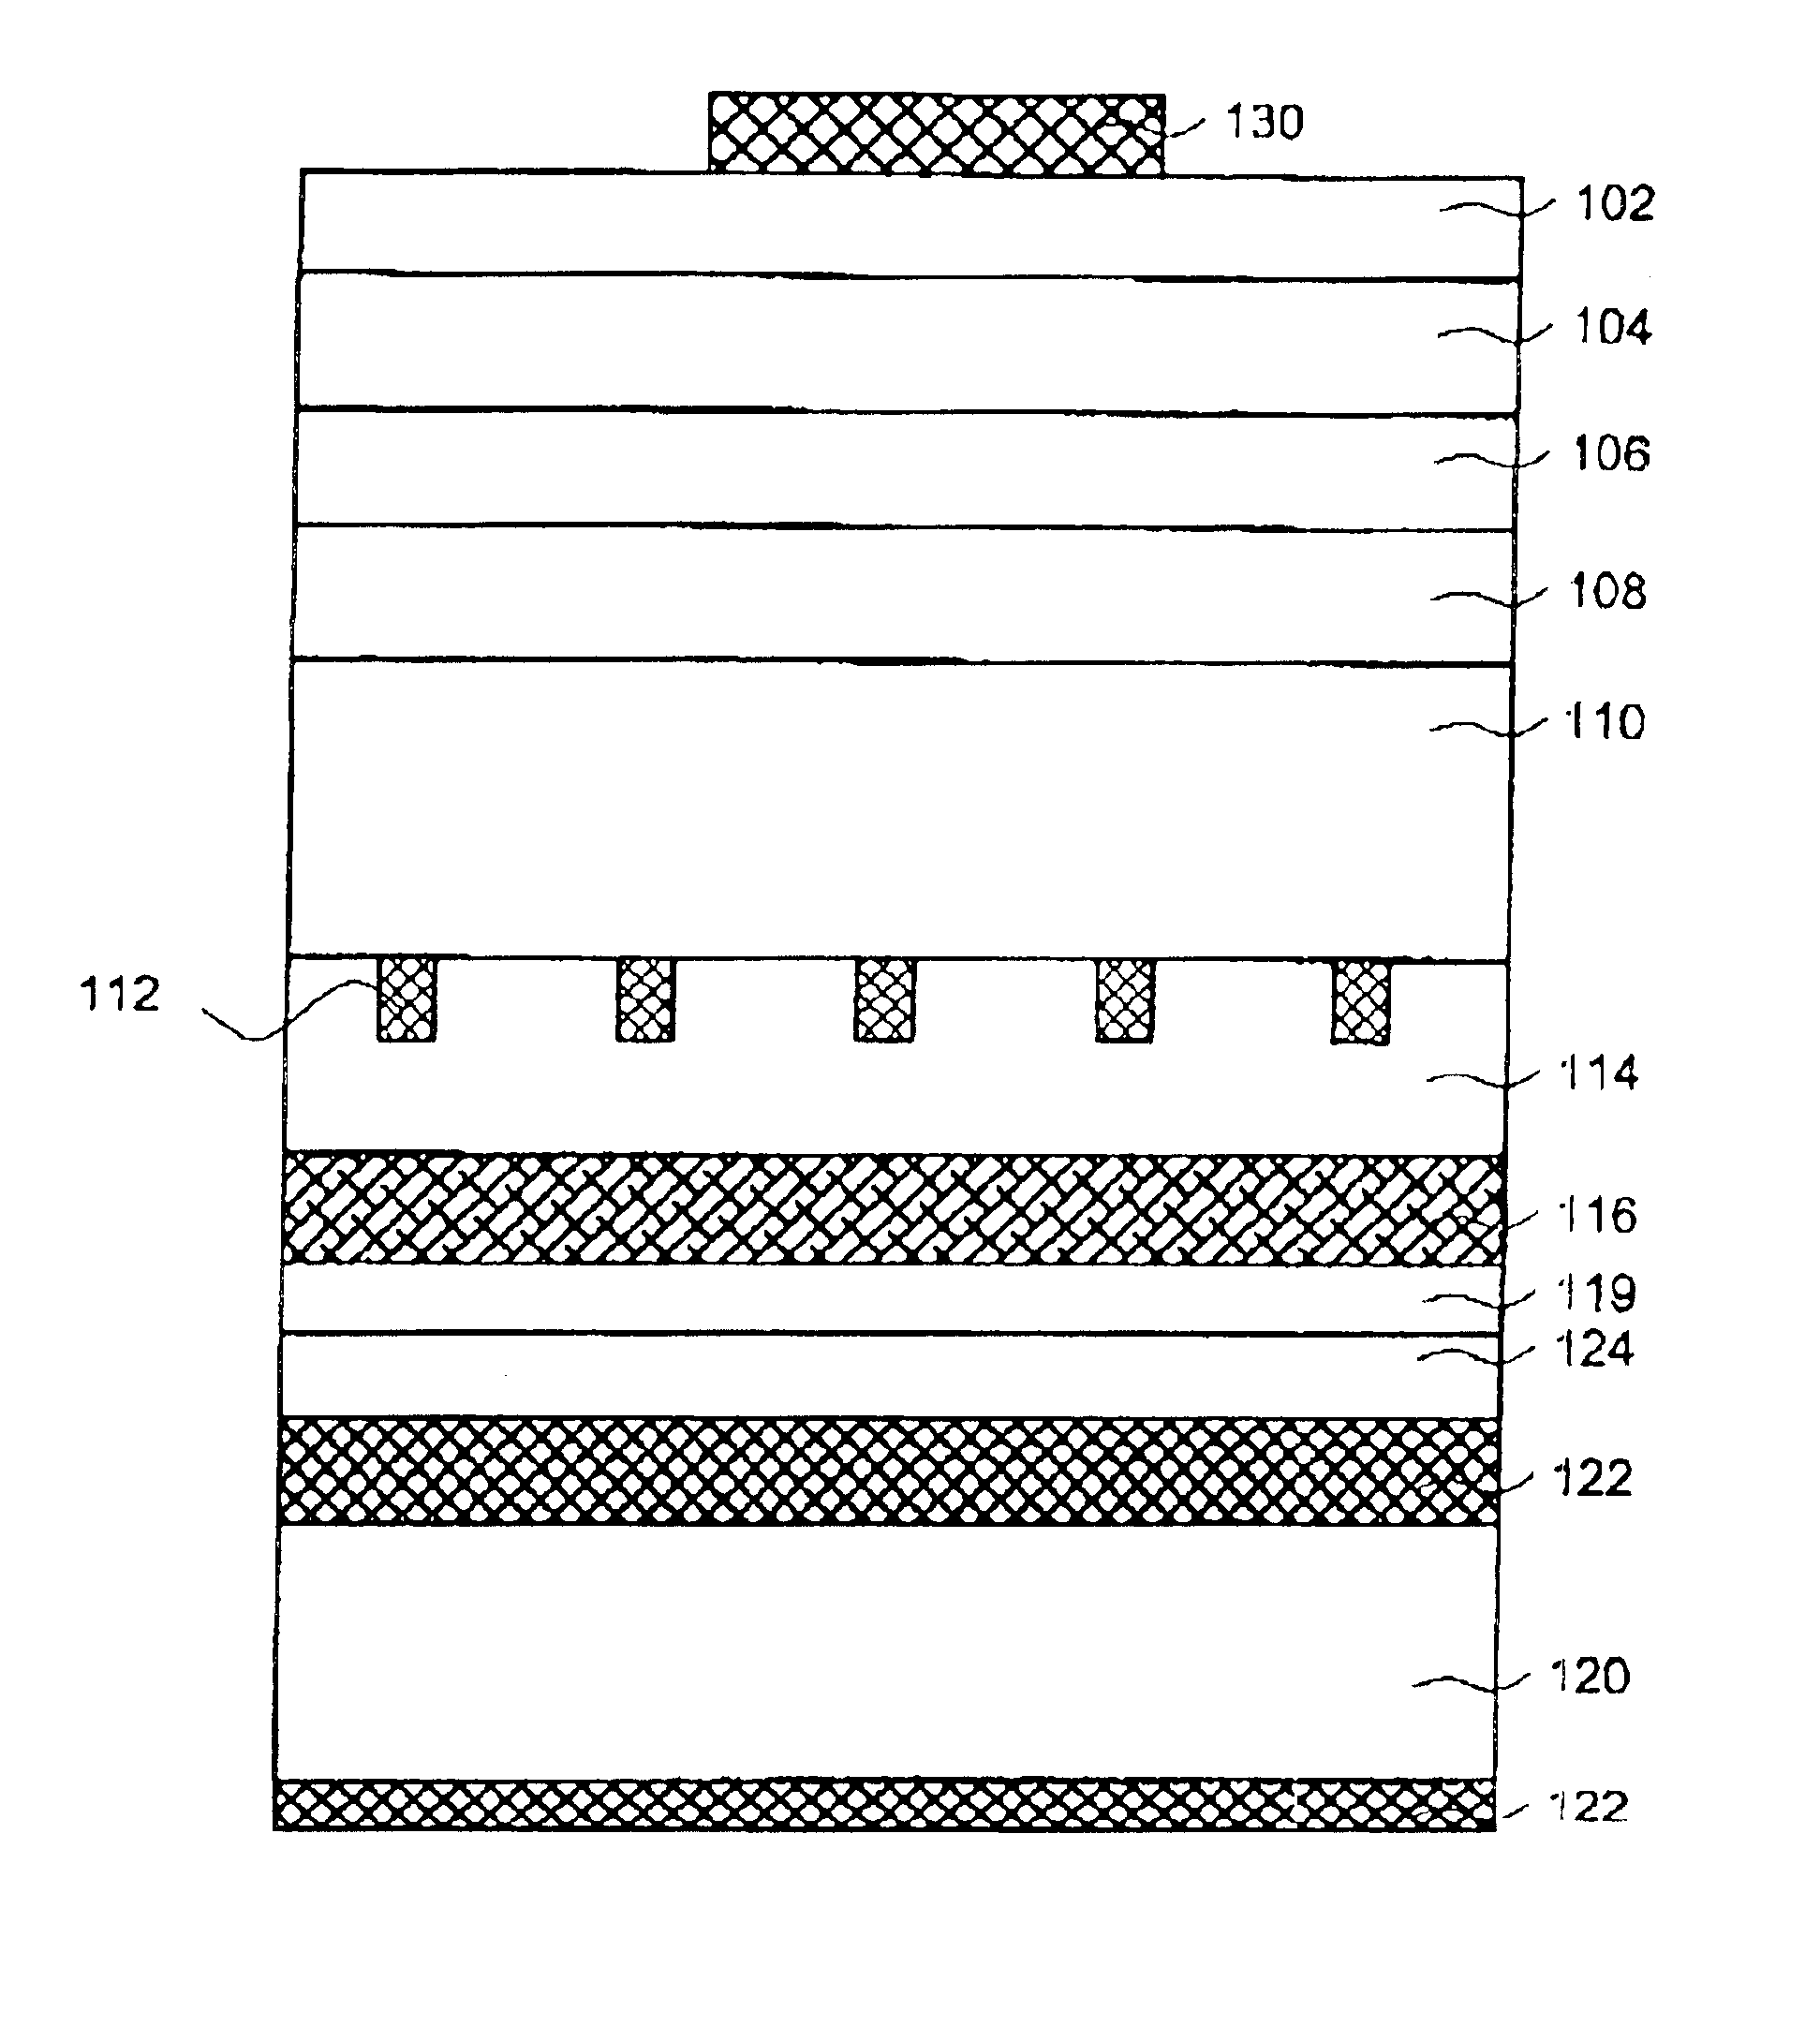 High efficiency light emitting diode and method of making the same